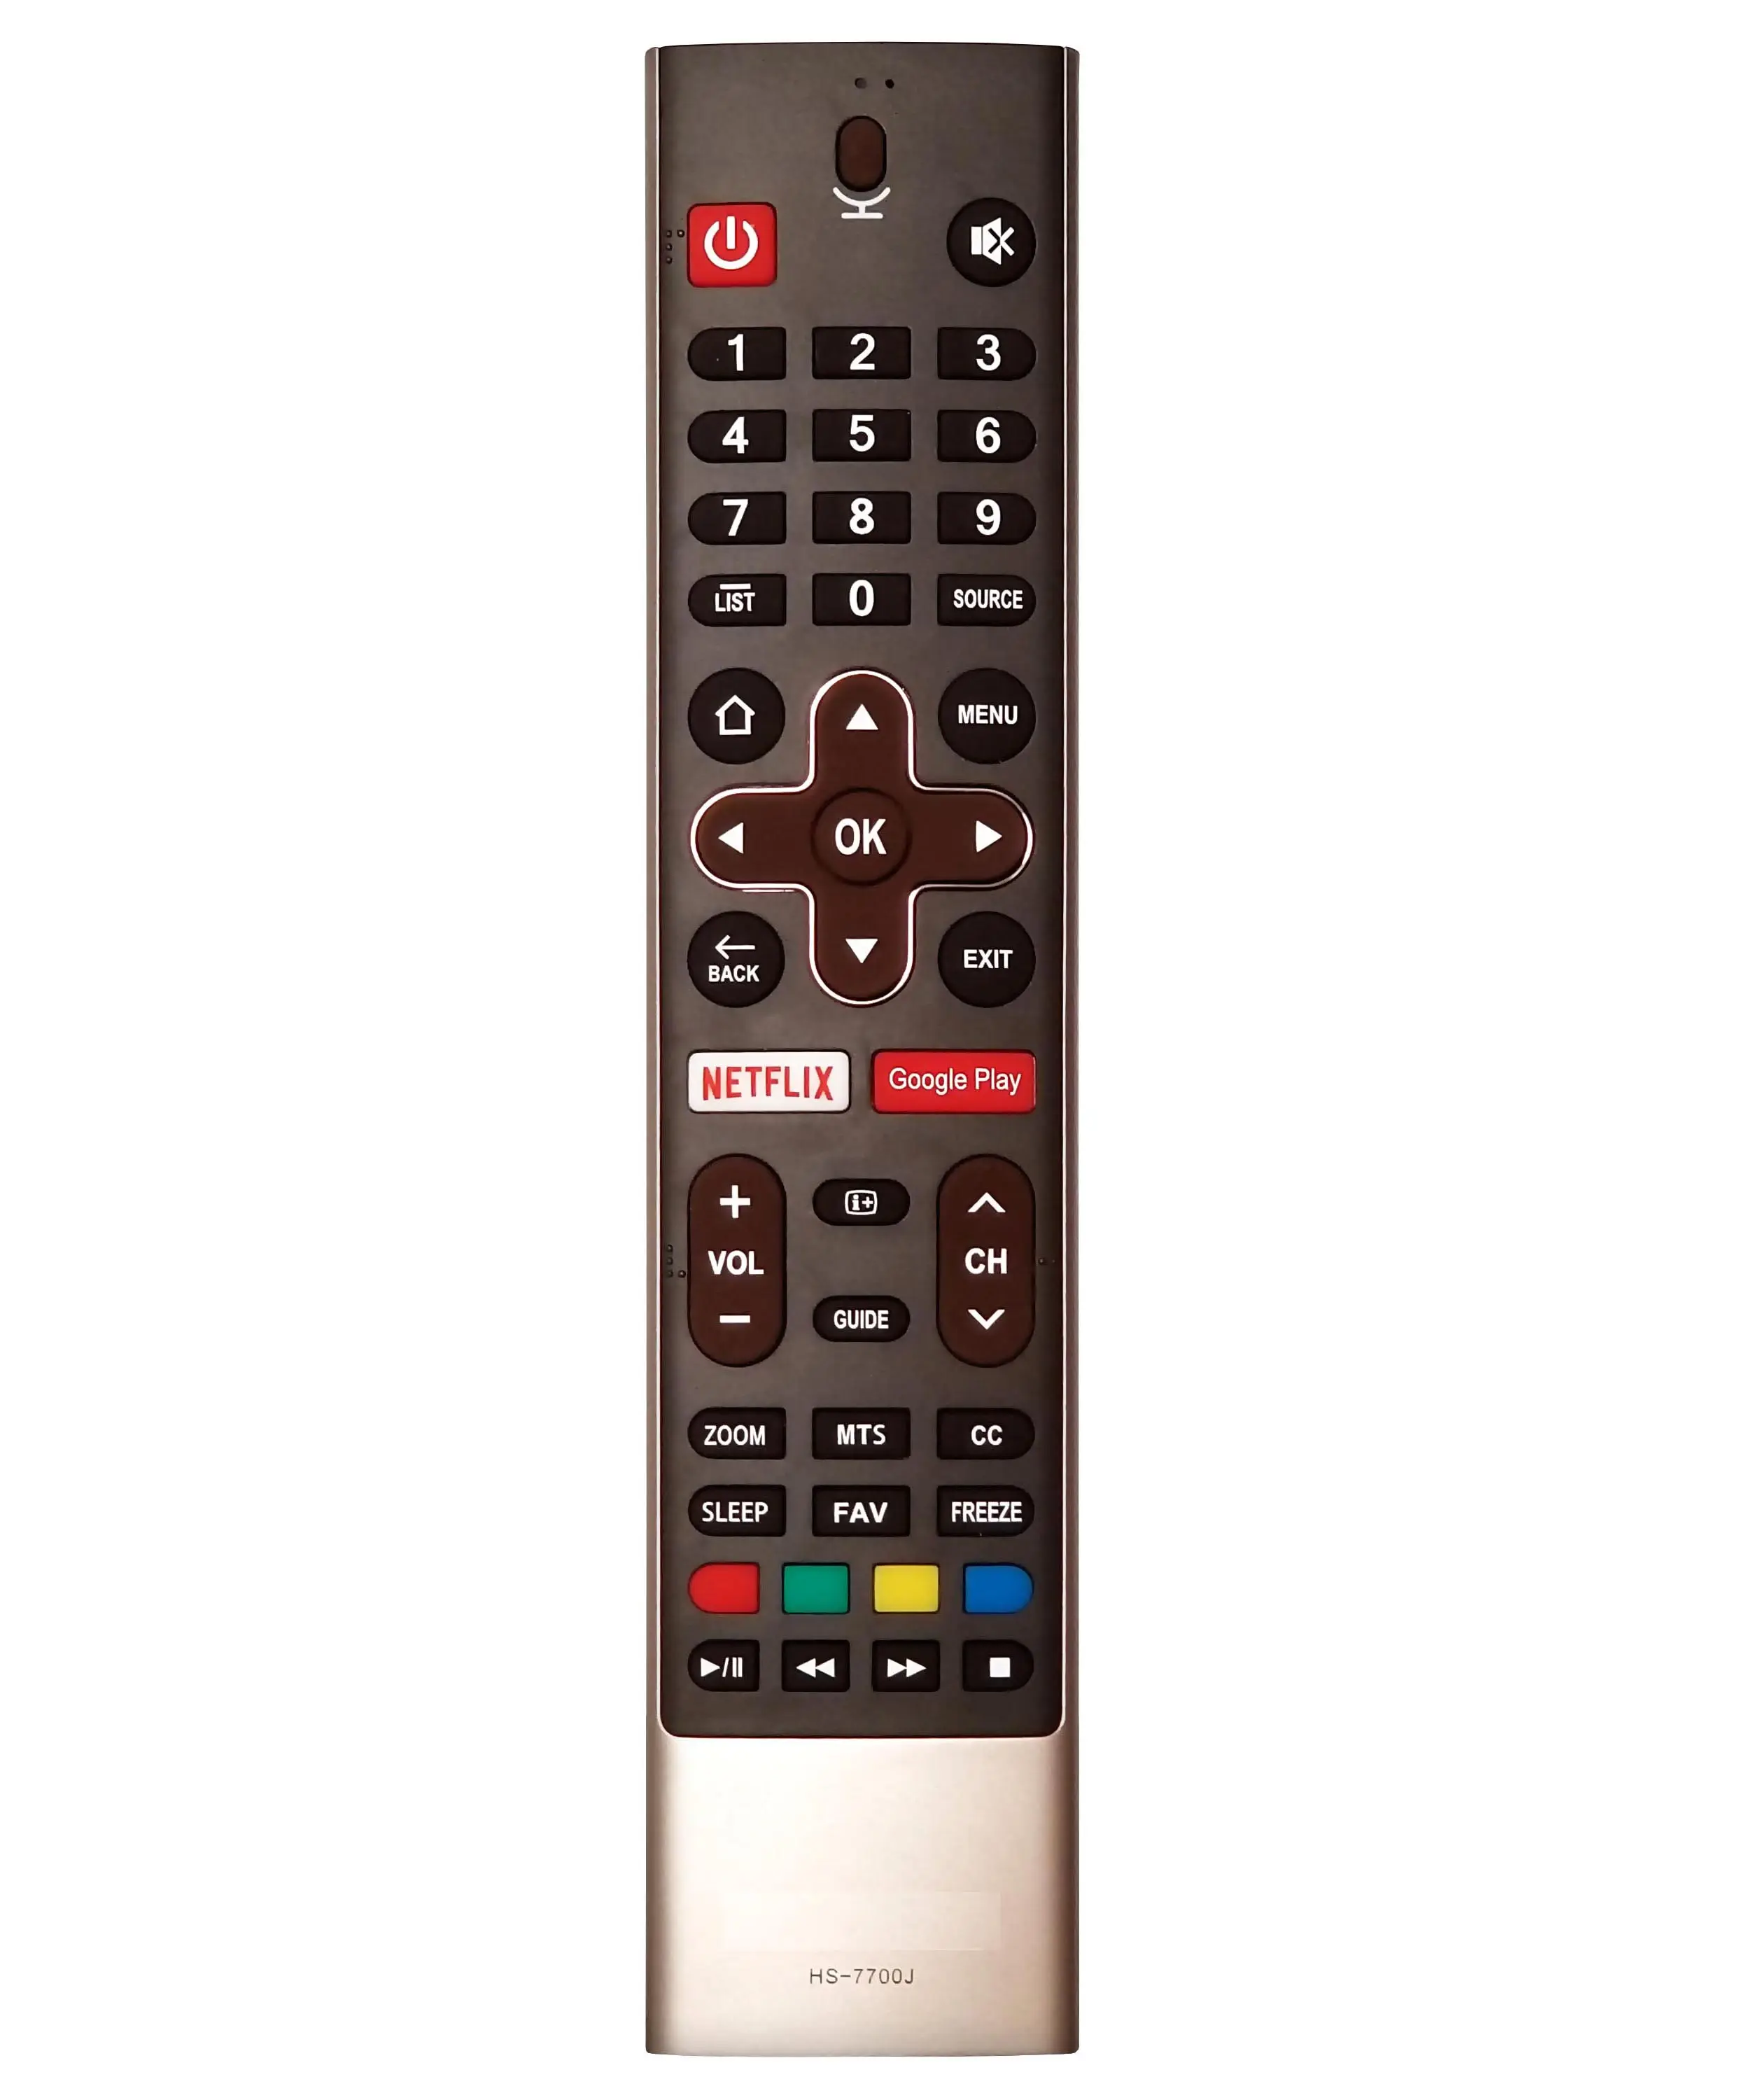 HS-7700J New Voice Remote Control For Sky-worth Android Smart TVG2 G2A G6 XA8000 Series with Netflix